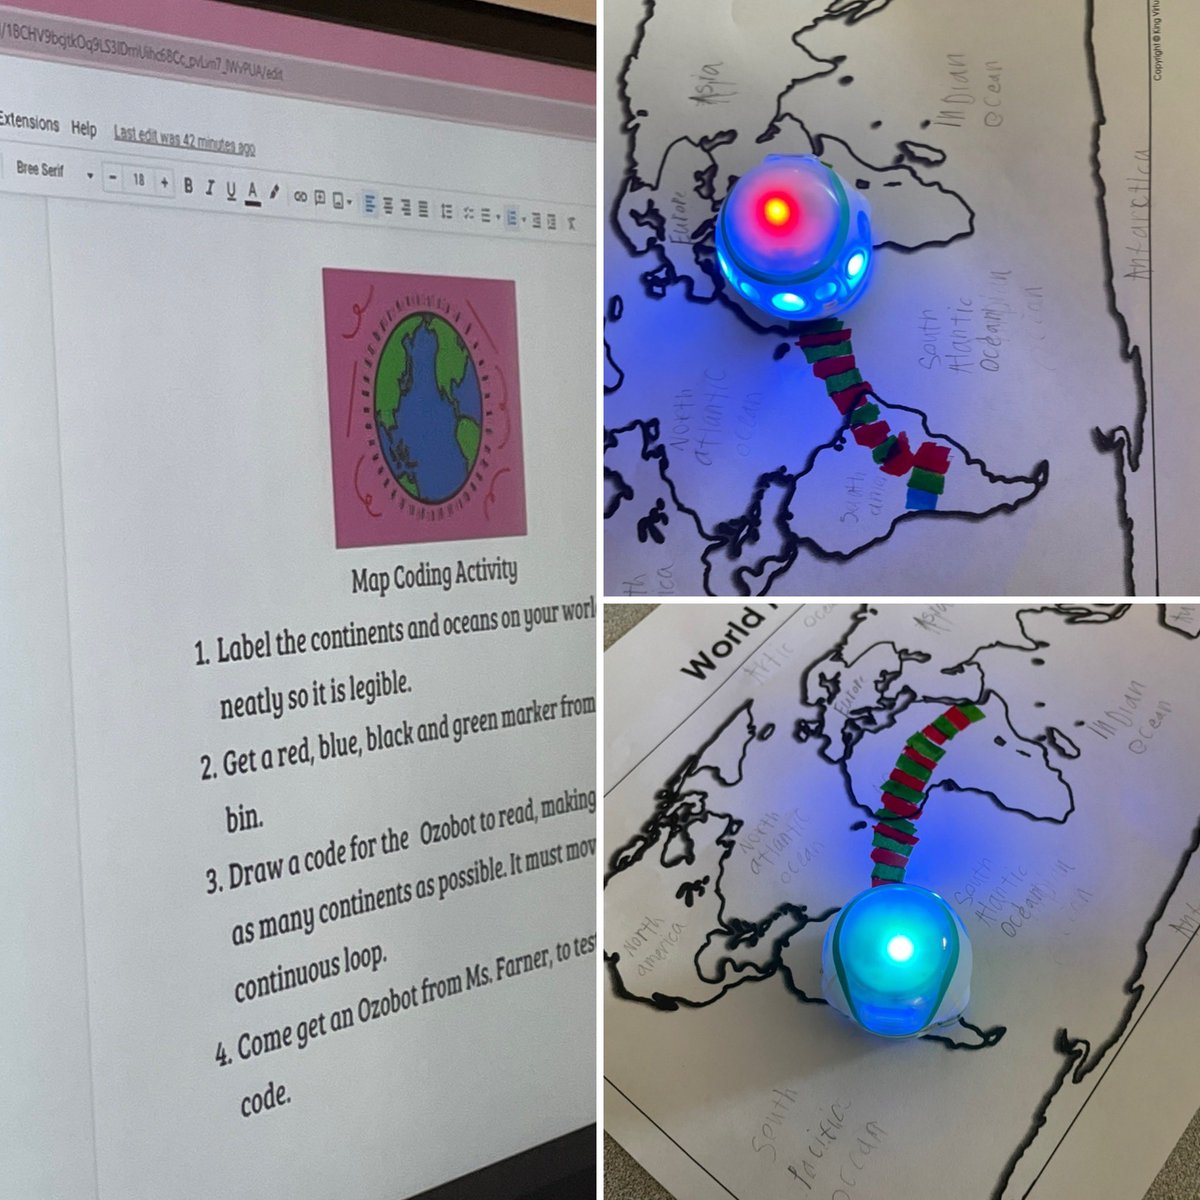 Hey @Ozobot! We loved our geography lesson using our ozobots. Big fun! #6thchat #swatarastrong #stemismyjam